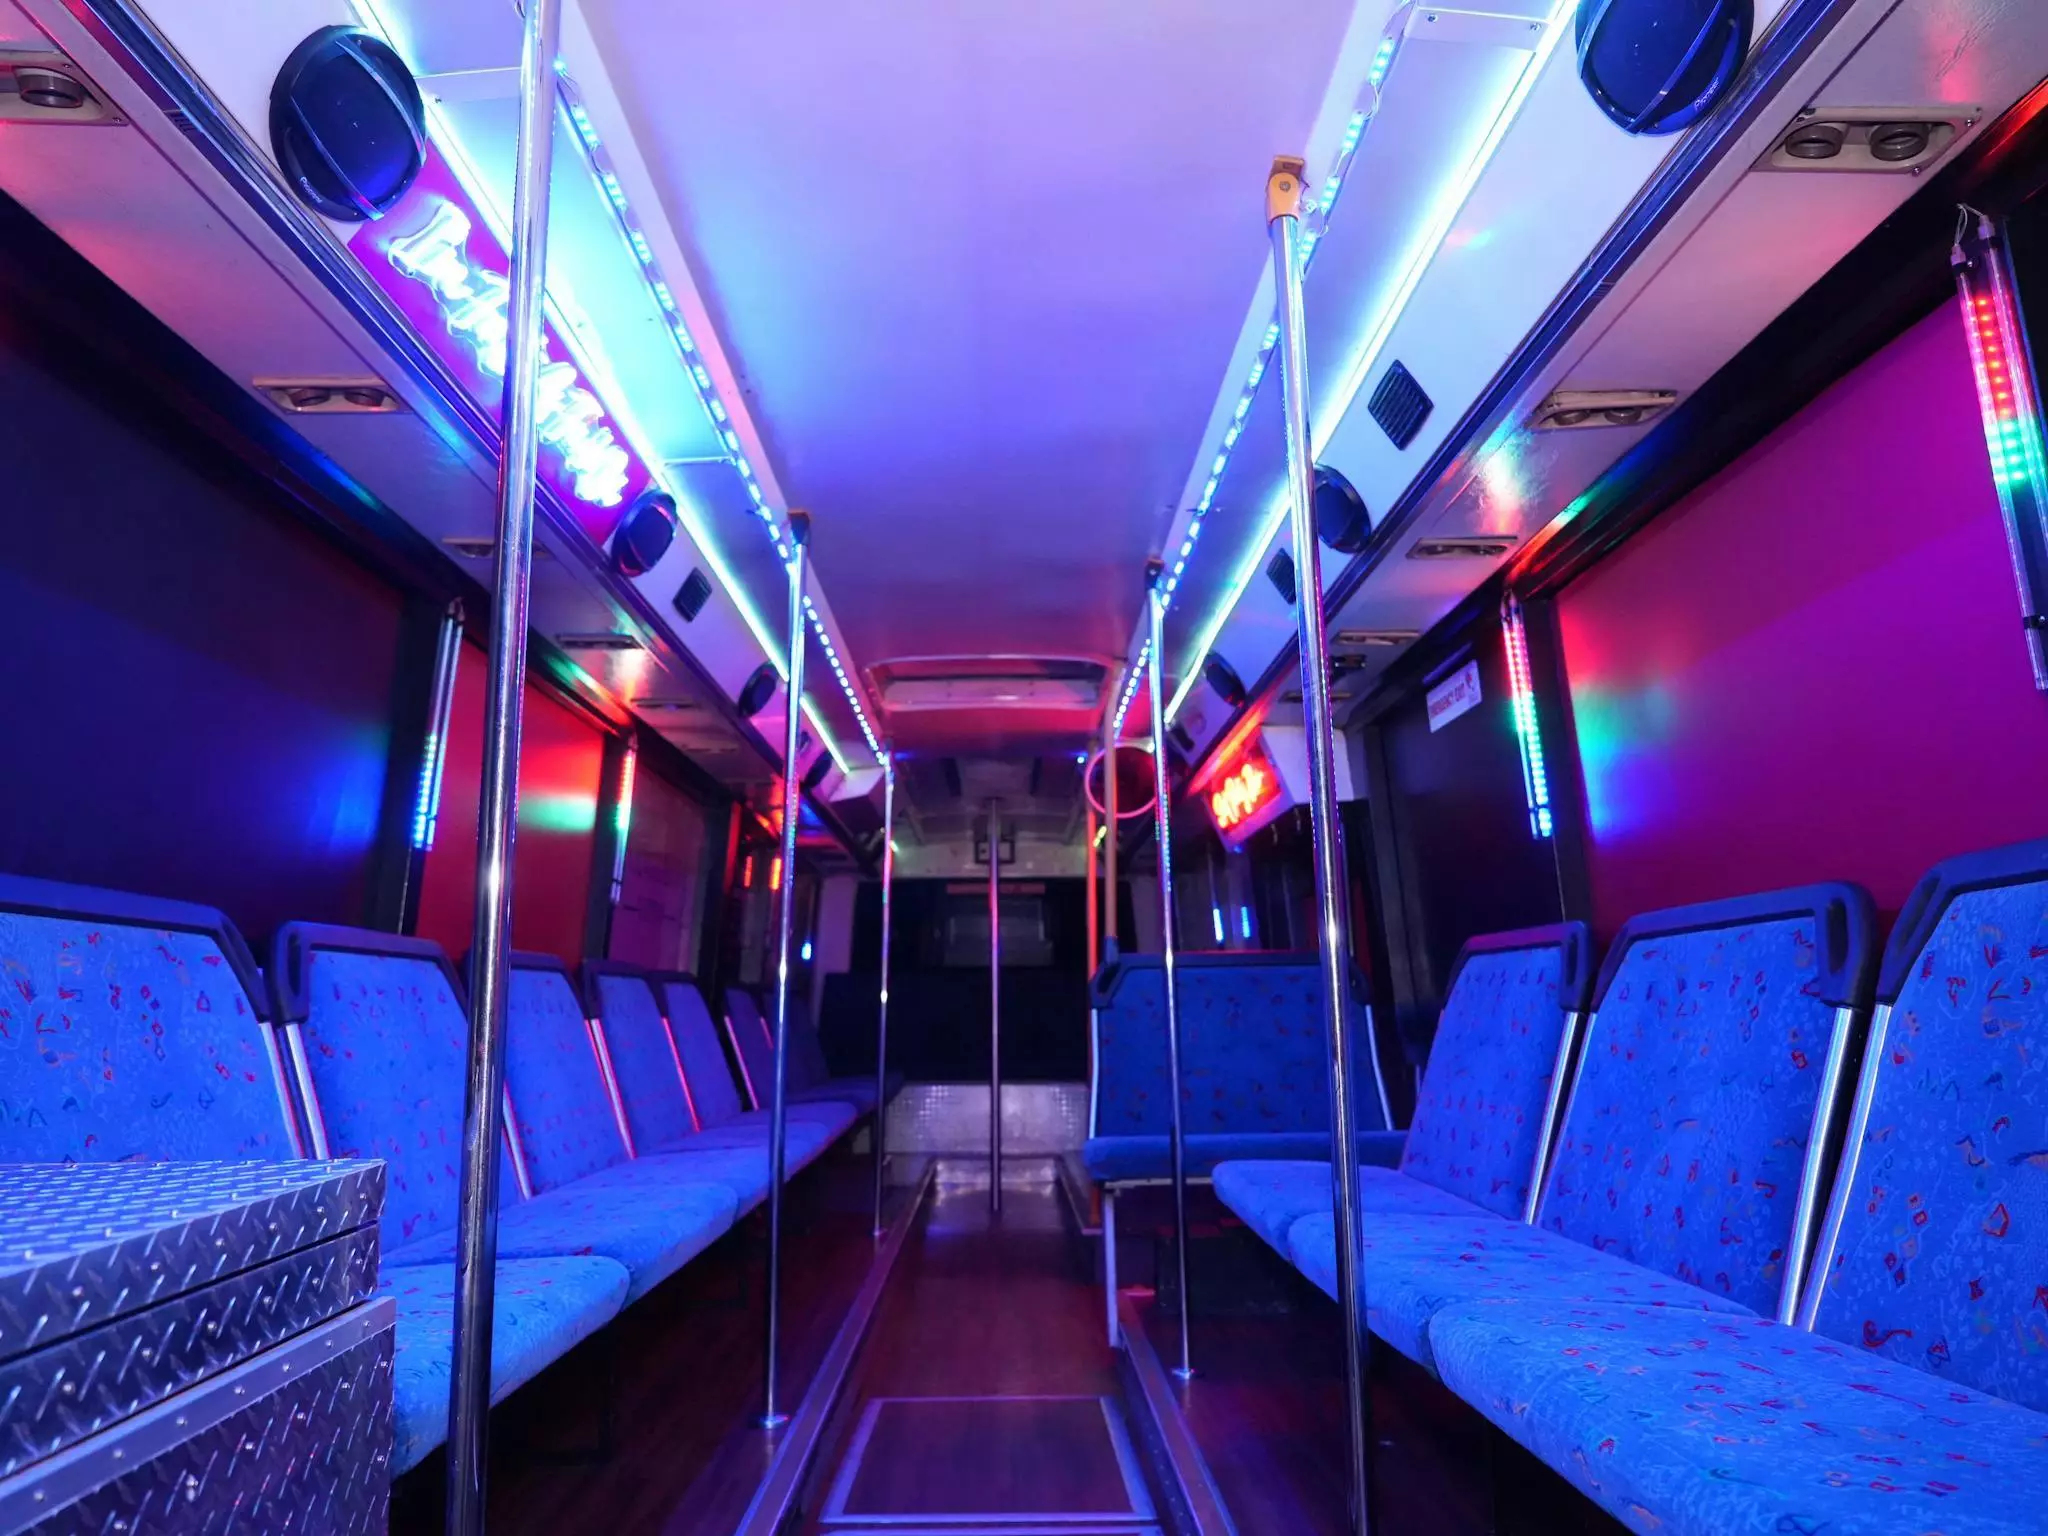 Special 50% Off Offer for SWAT PARTY BUS Transfers!